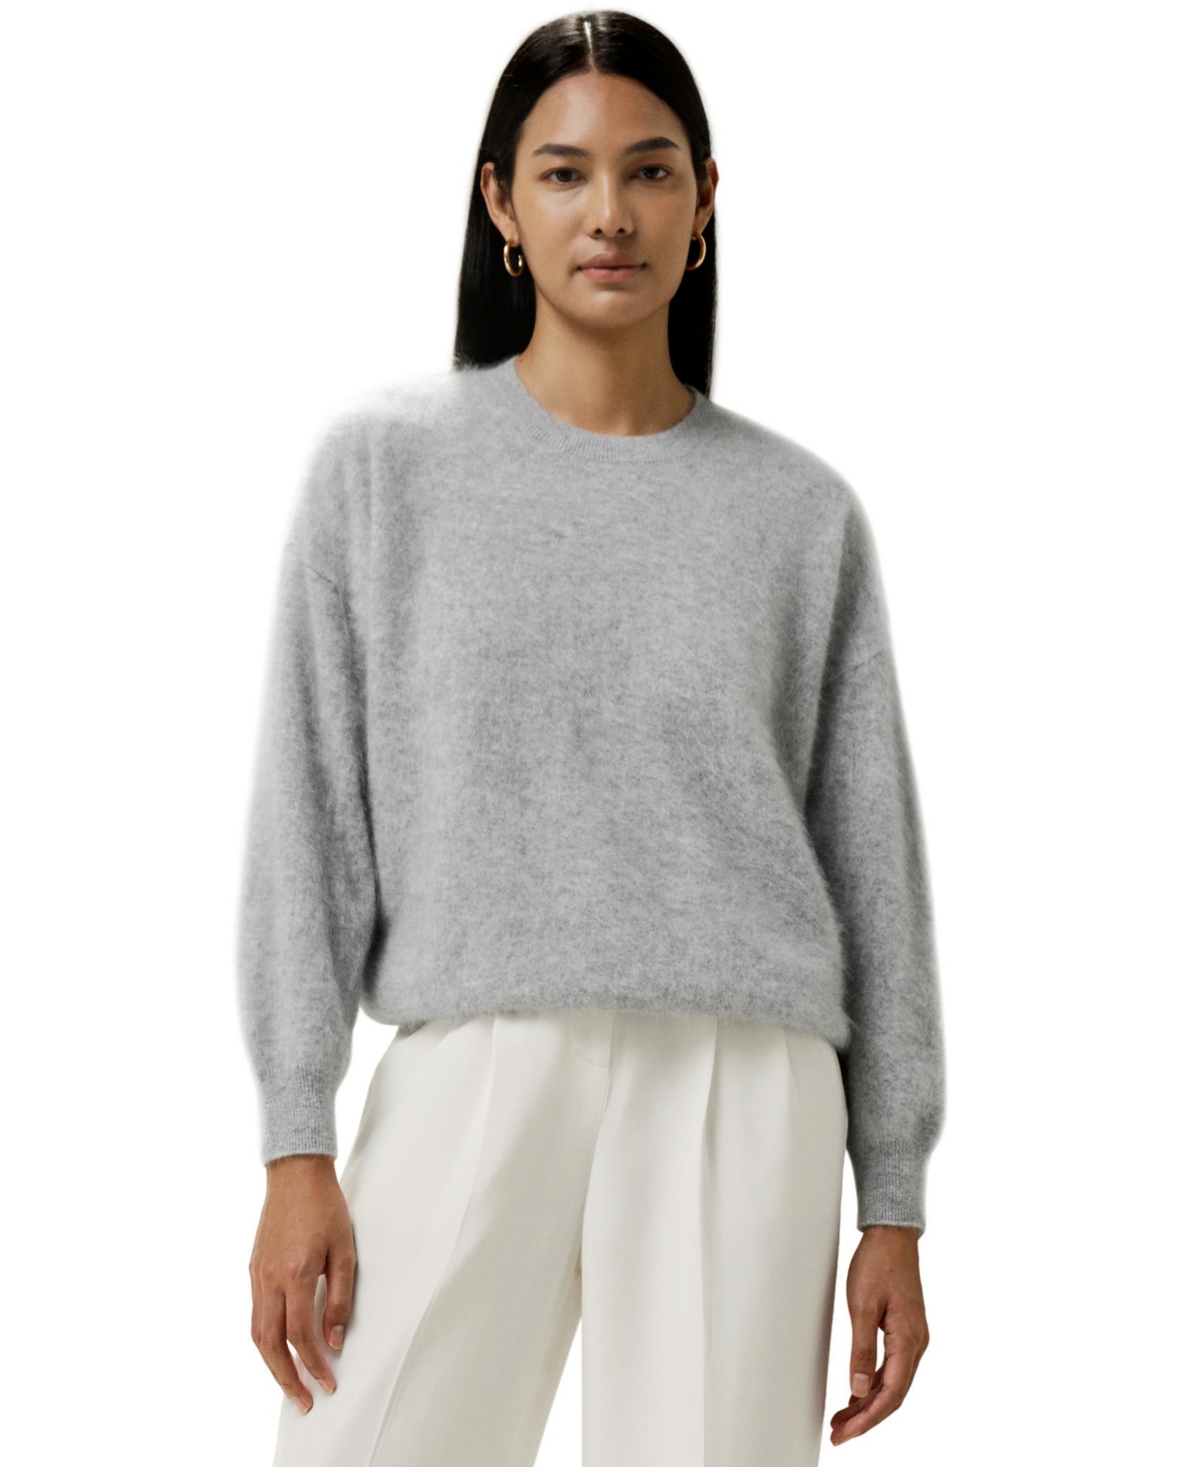 Women's Brushed Cashmere Pullover Sweater for Women - Light gray